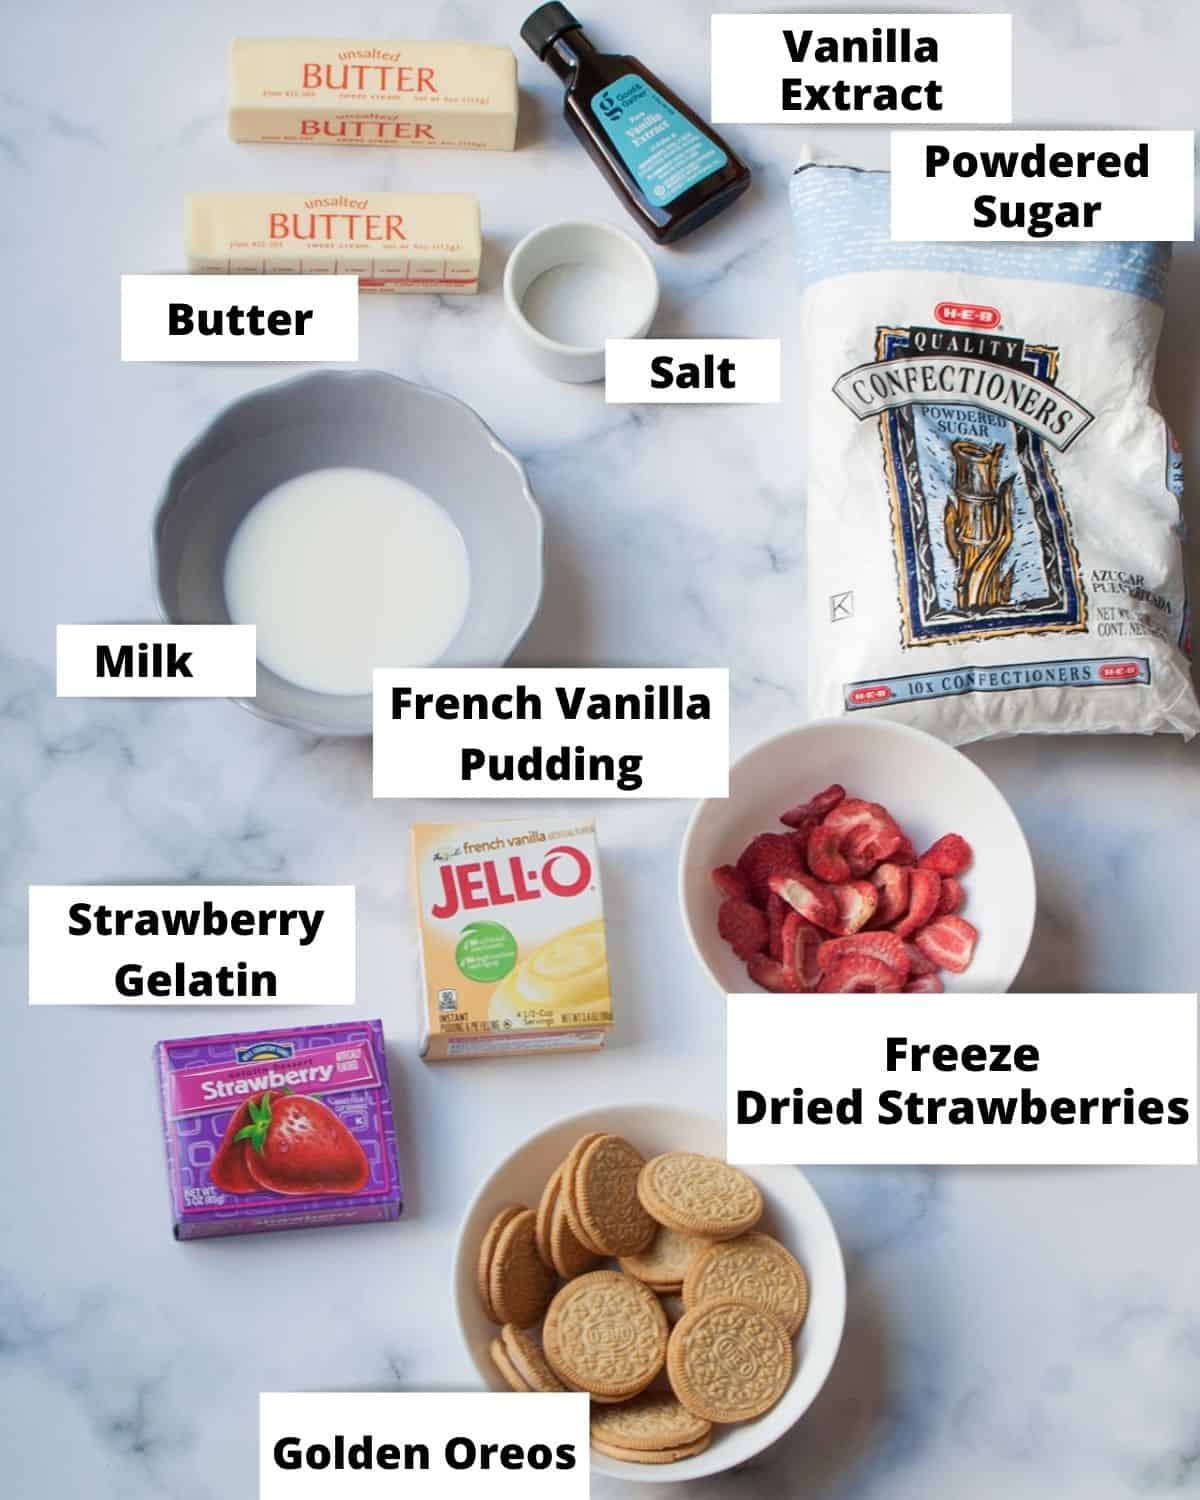 ingredients needed to make the frosting and topping for Strawberry Crunch Cupcakes